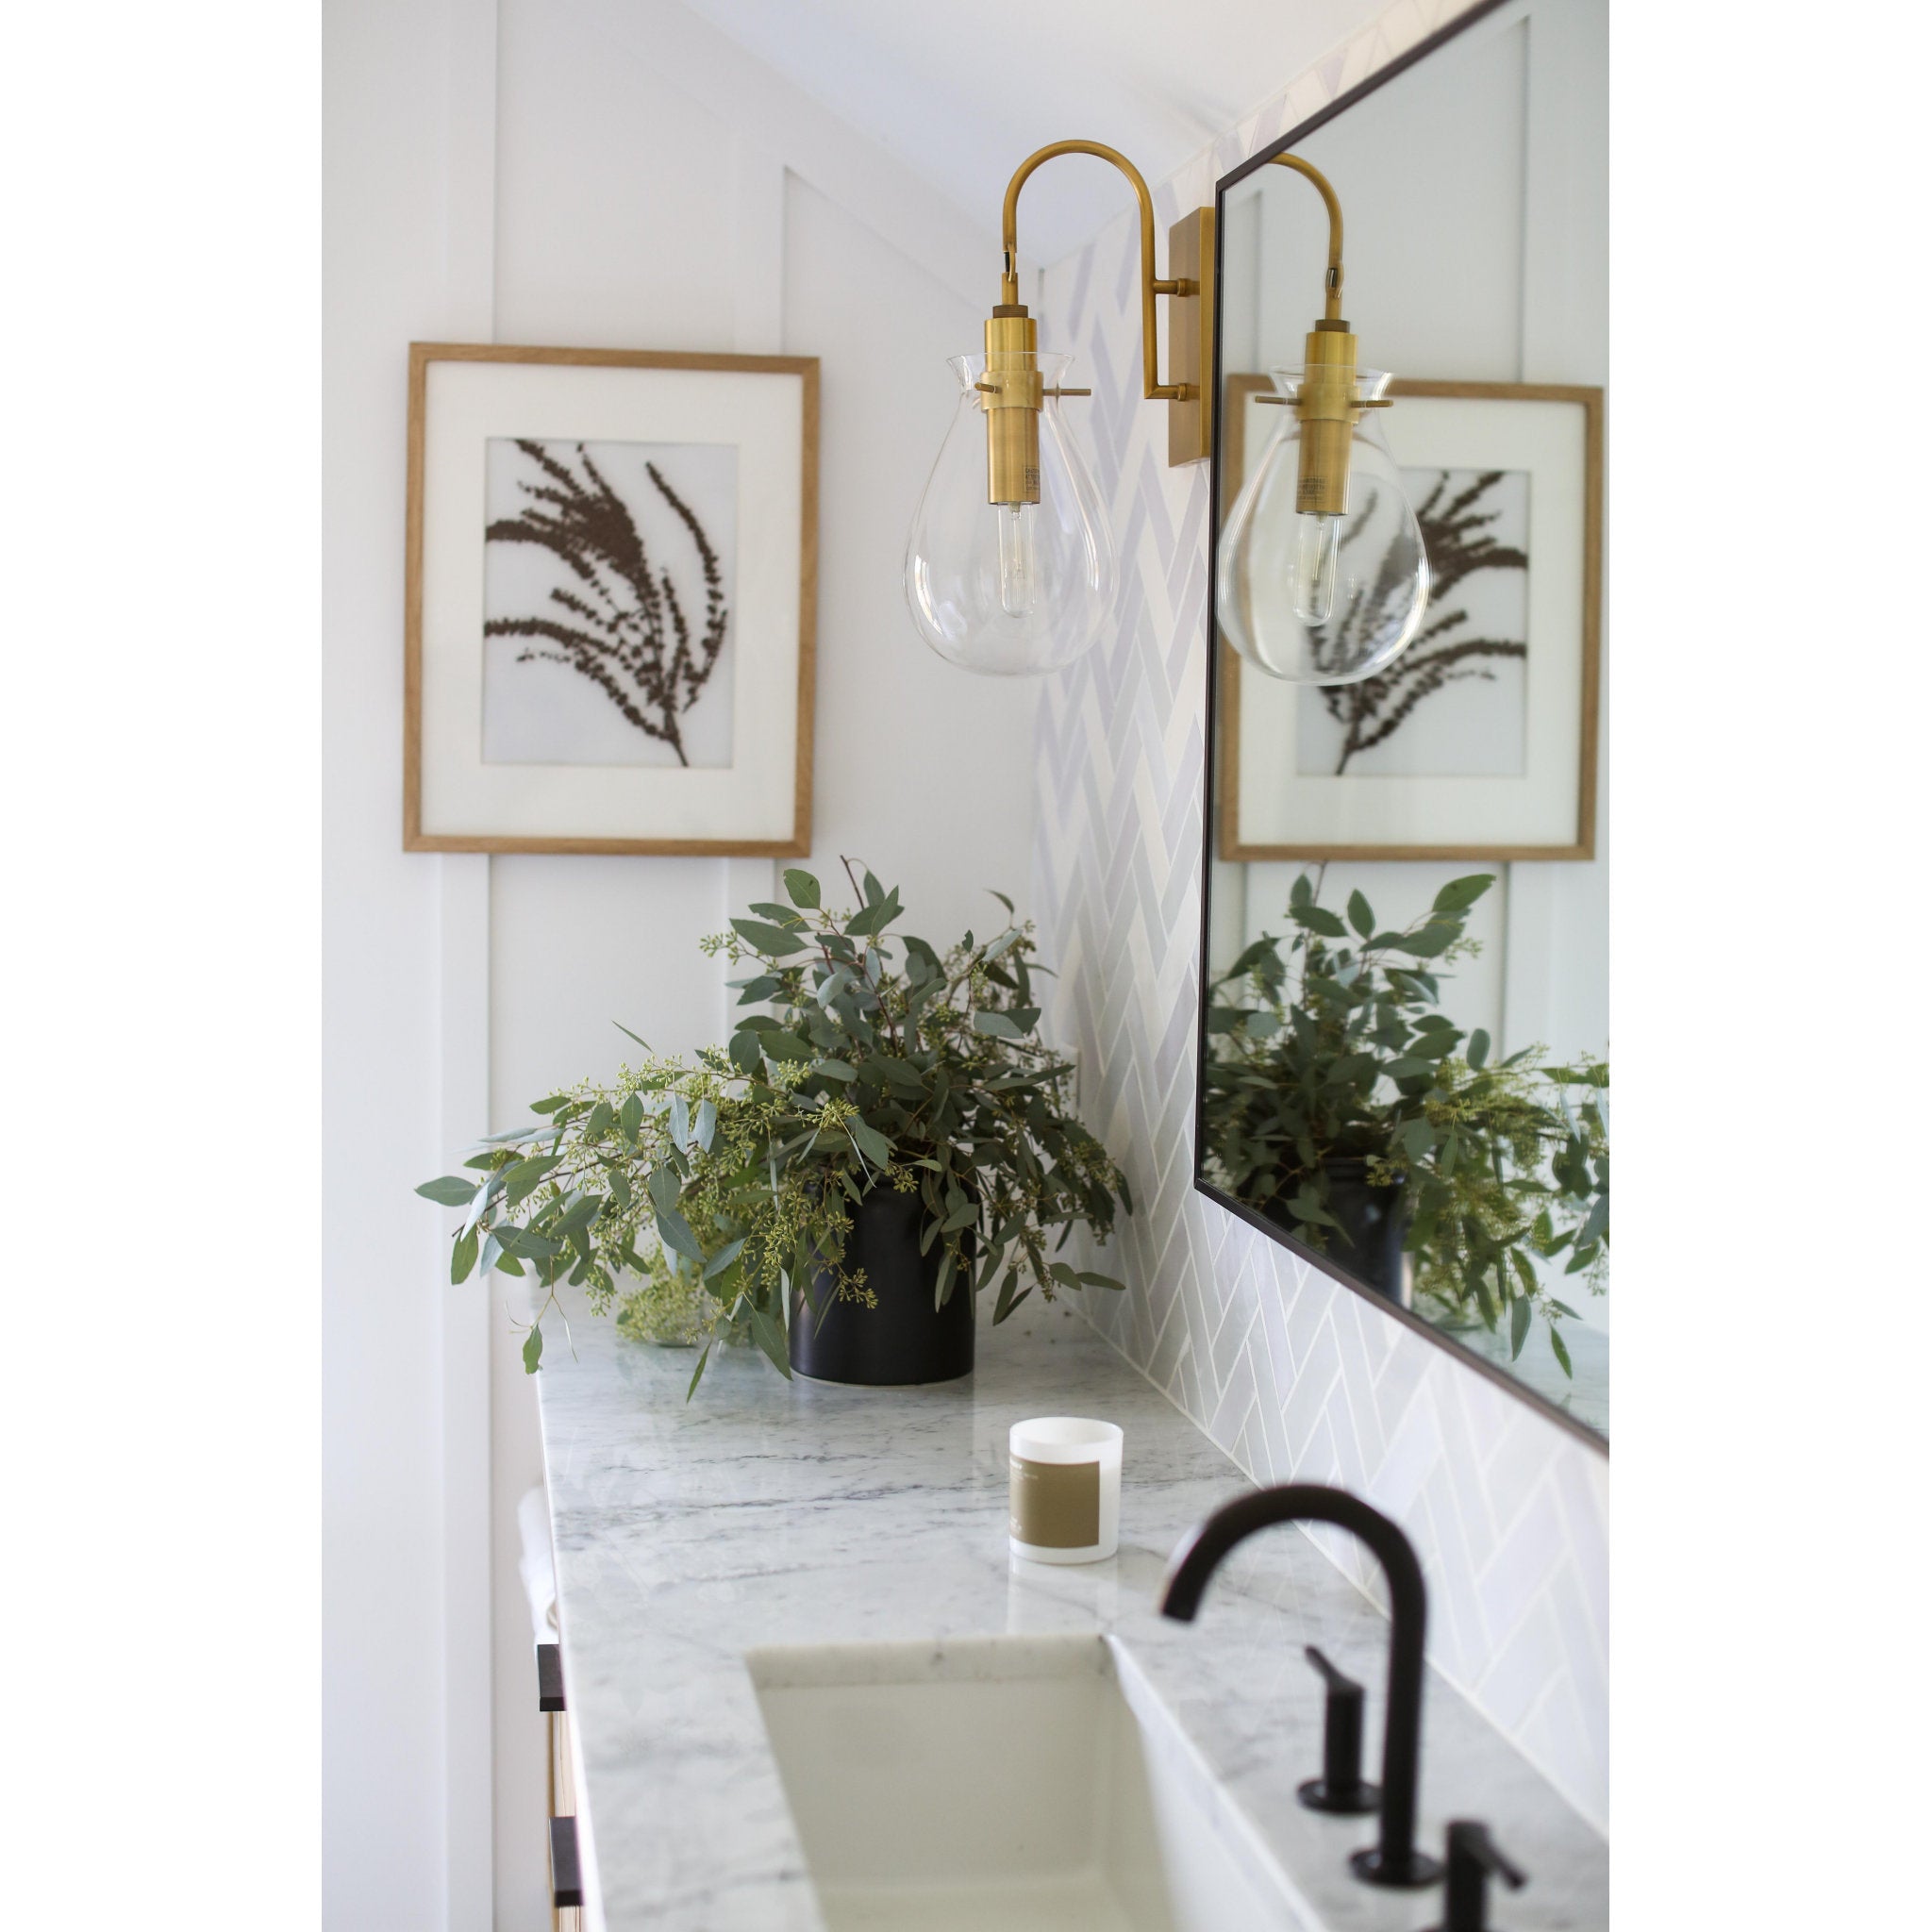 Ivy 1 Light Wall Sconce in Aged Brass by Becki Owens